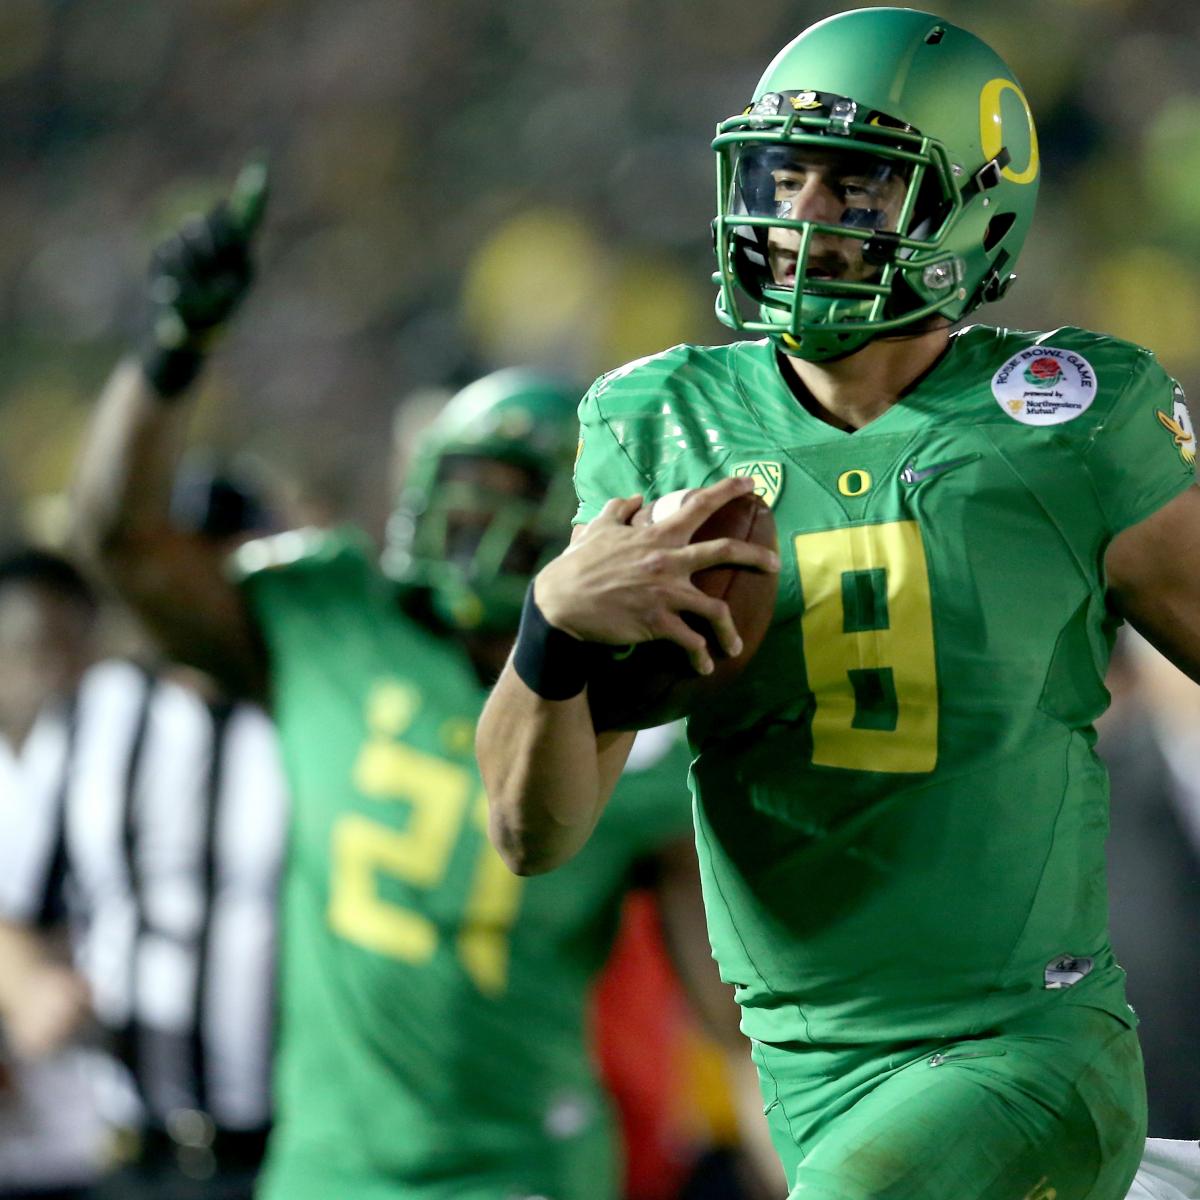 Rose Bowl 2015 Highlights and Standout Players from Oregon vs. Florida